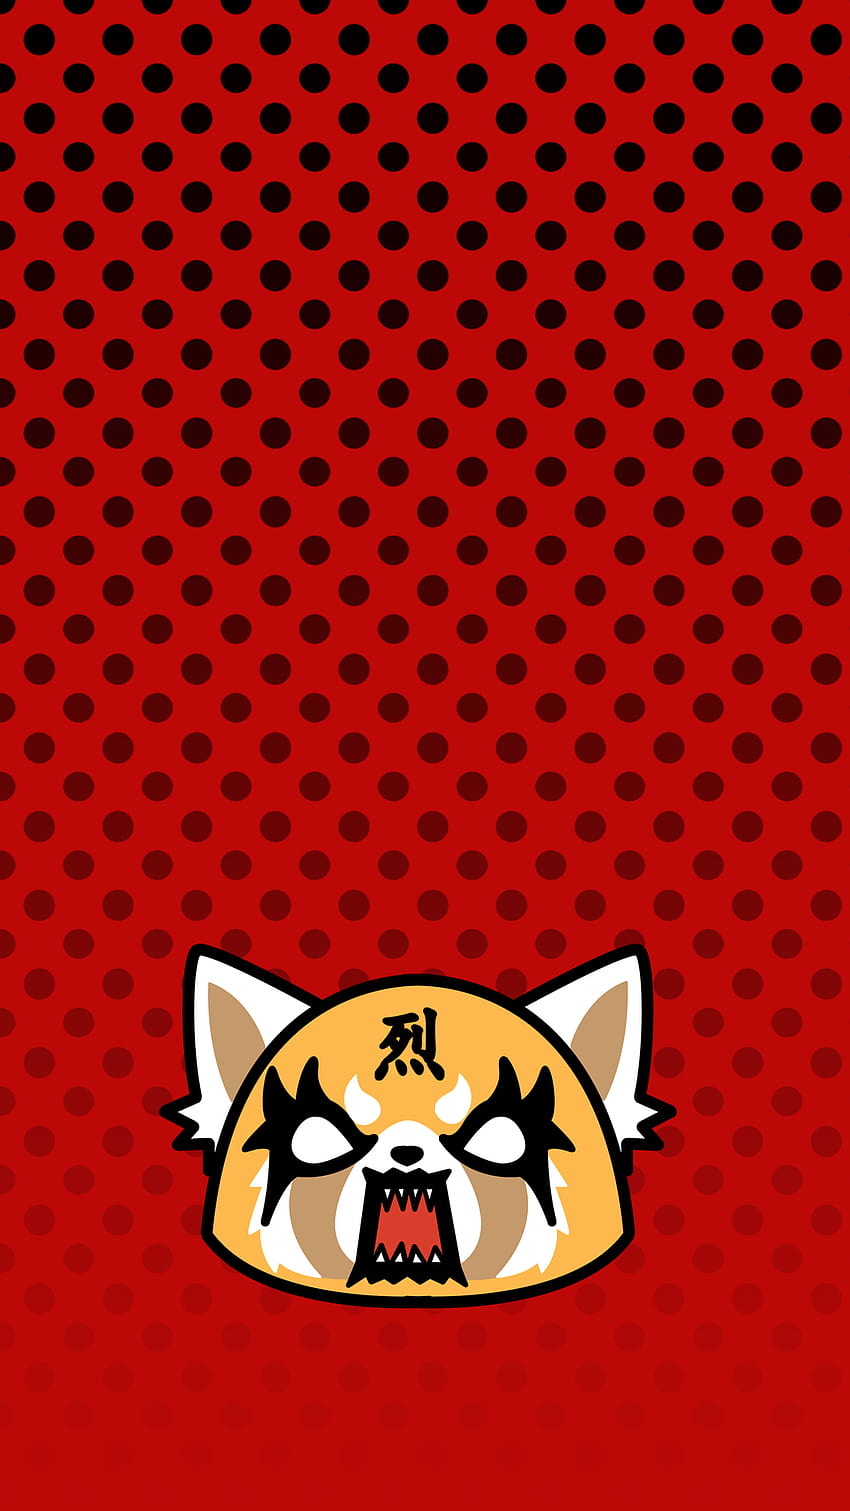 Aggretsuko wallpaper by clgault123  Download on ZEDGE  174c